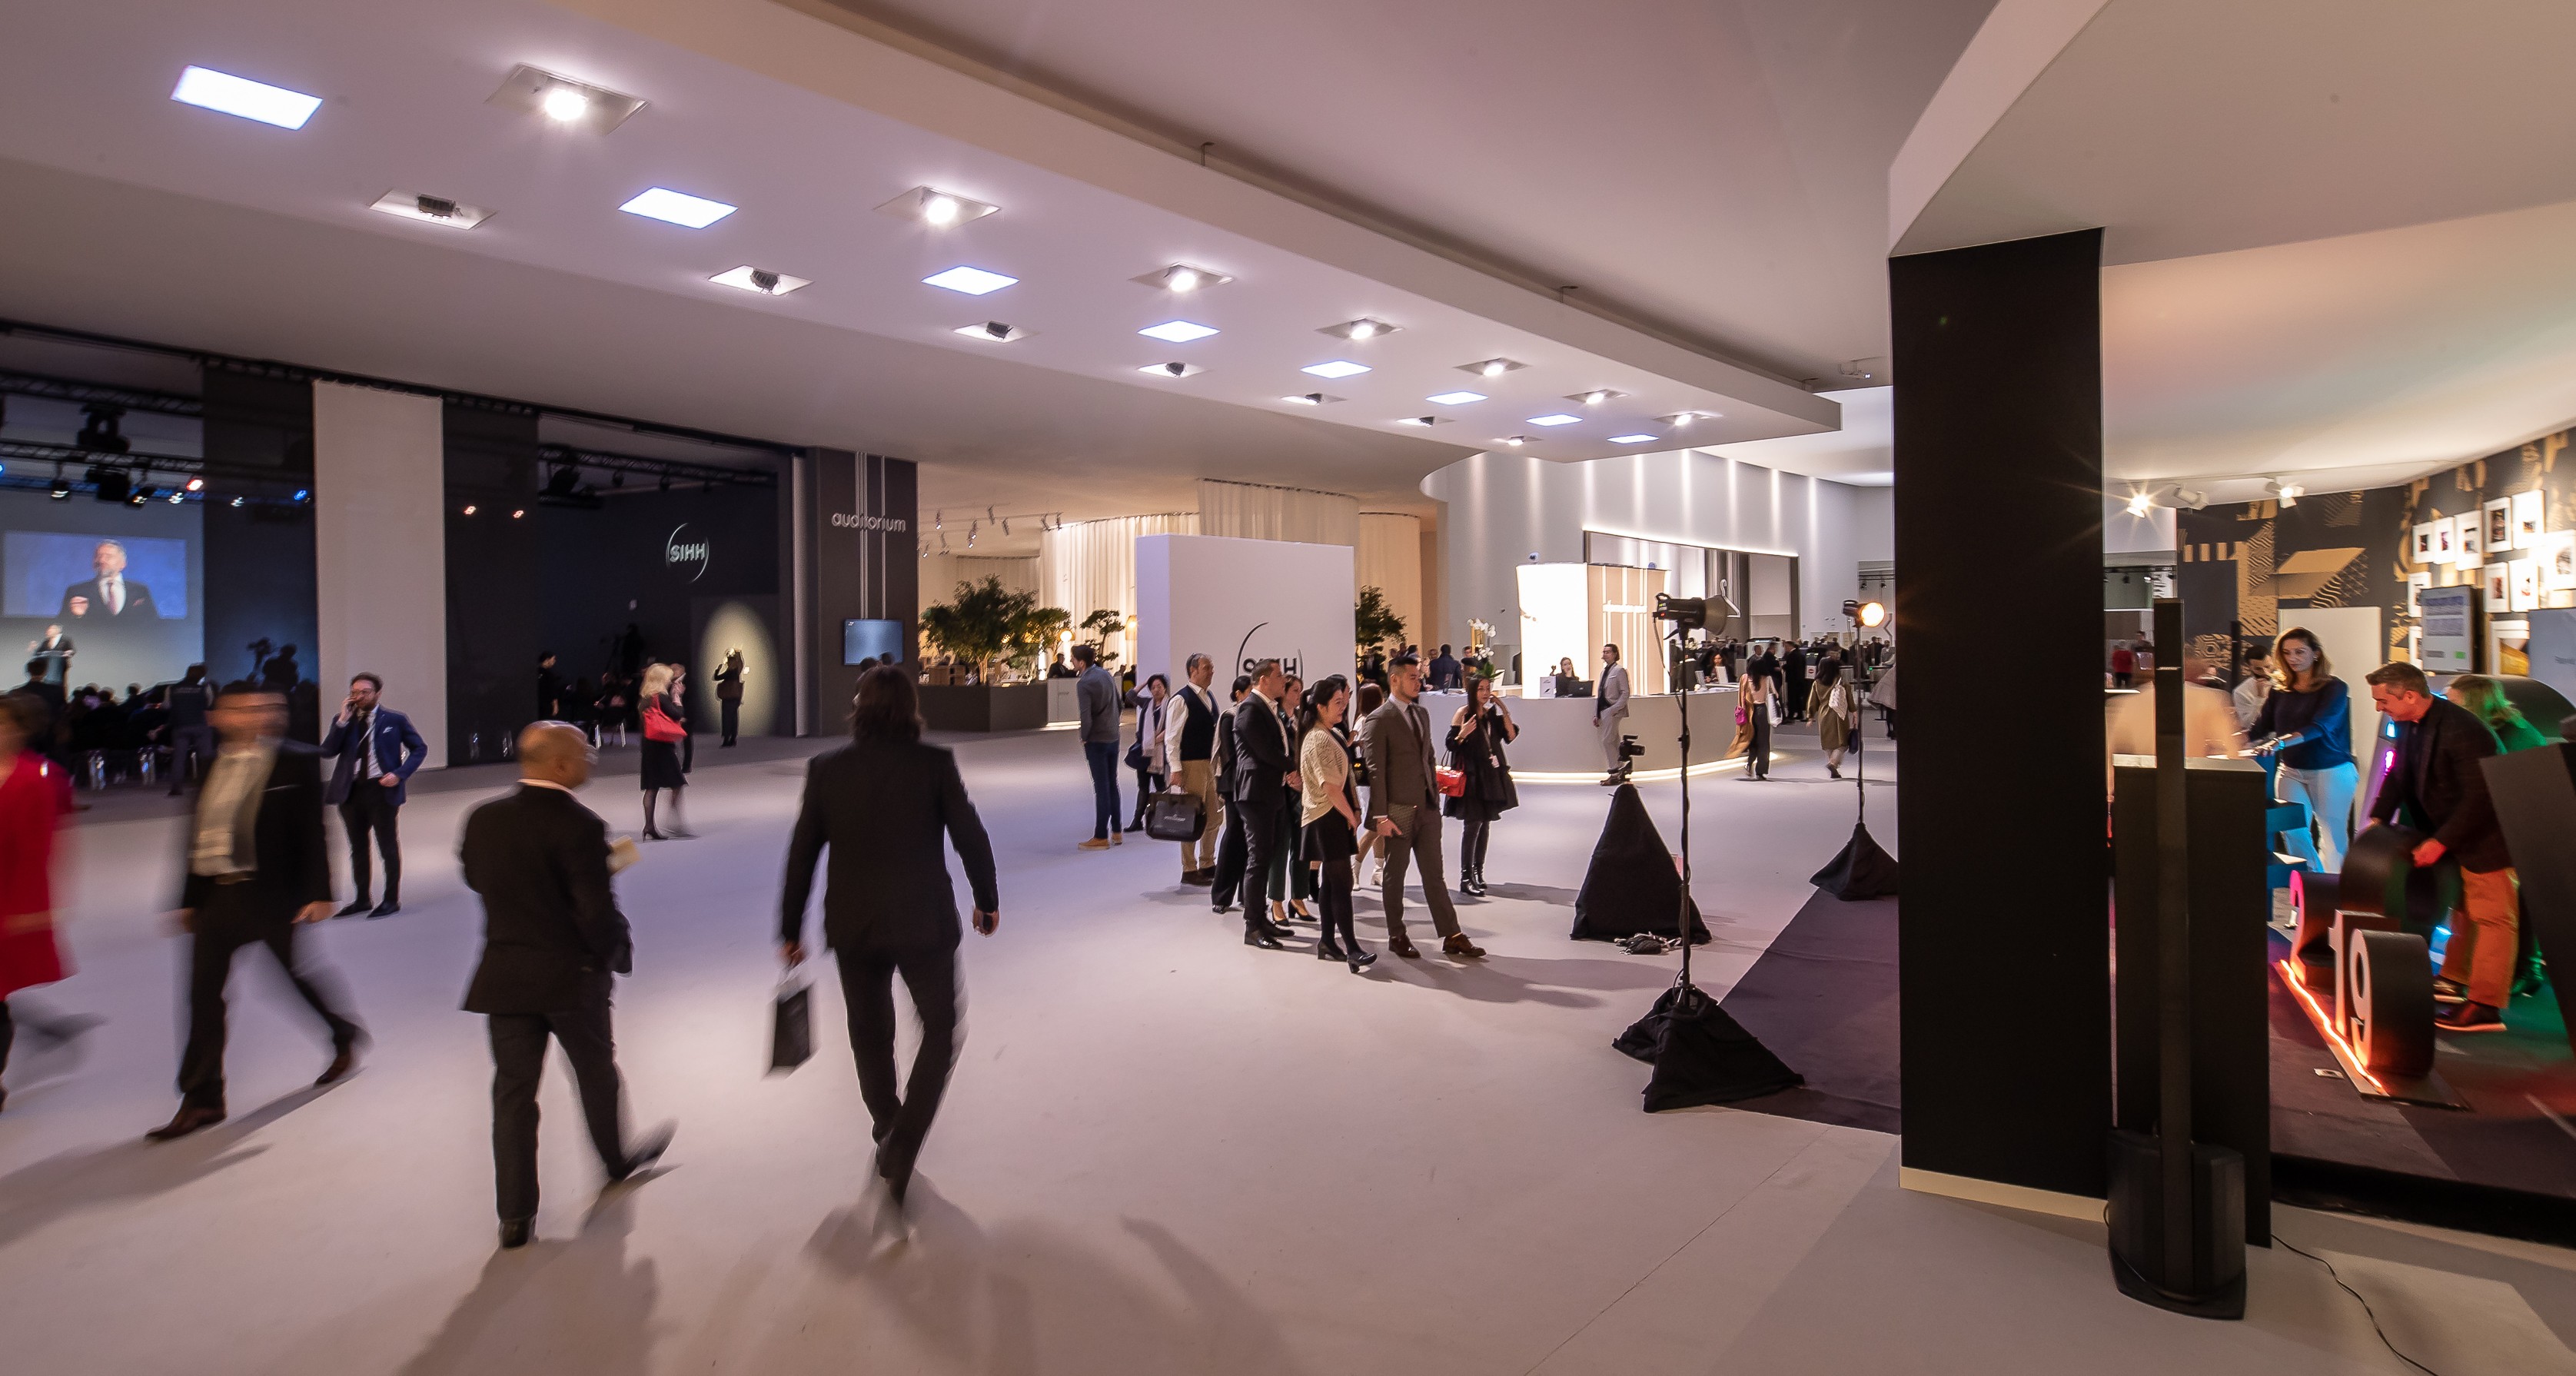 This year’s edition of SIHH attracted over 23,000 visitors from around the world.